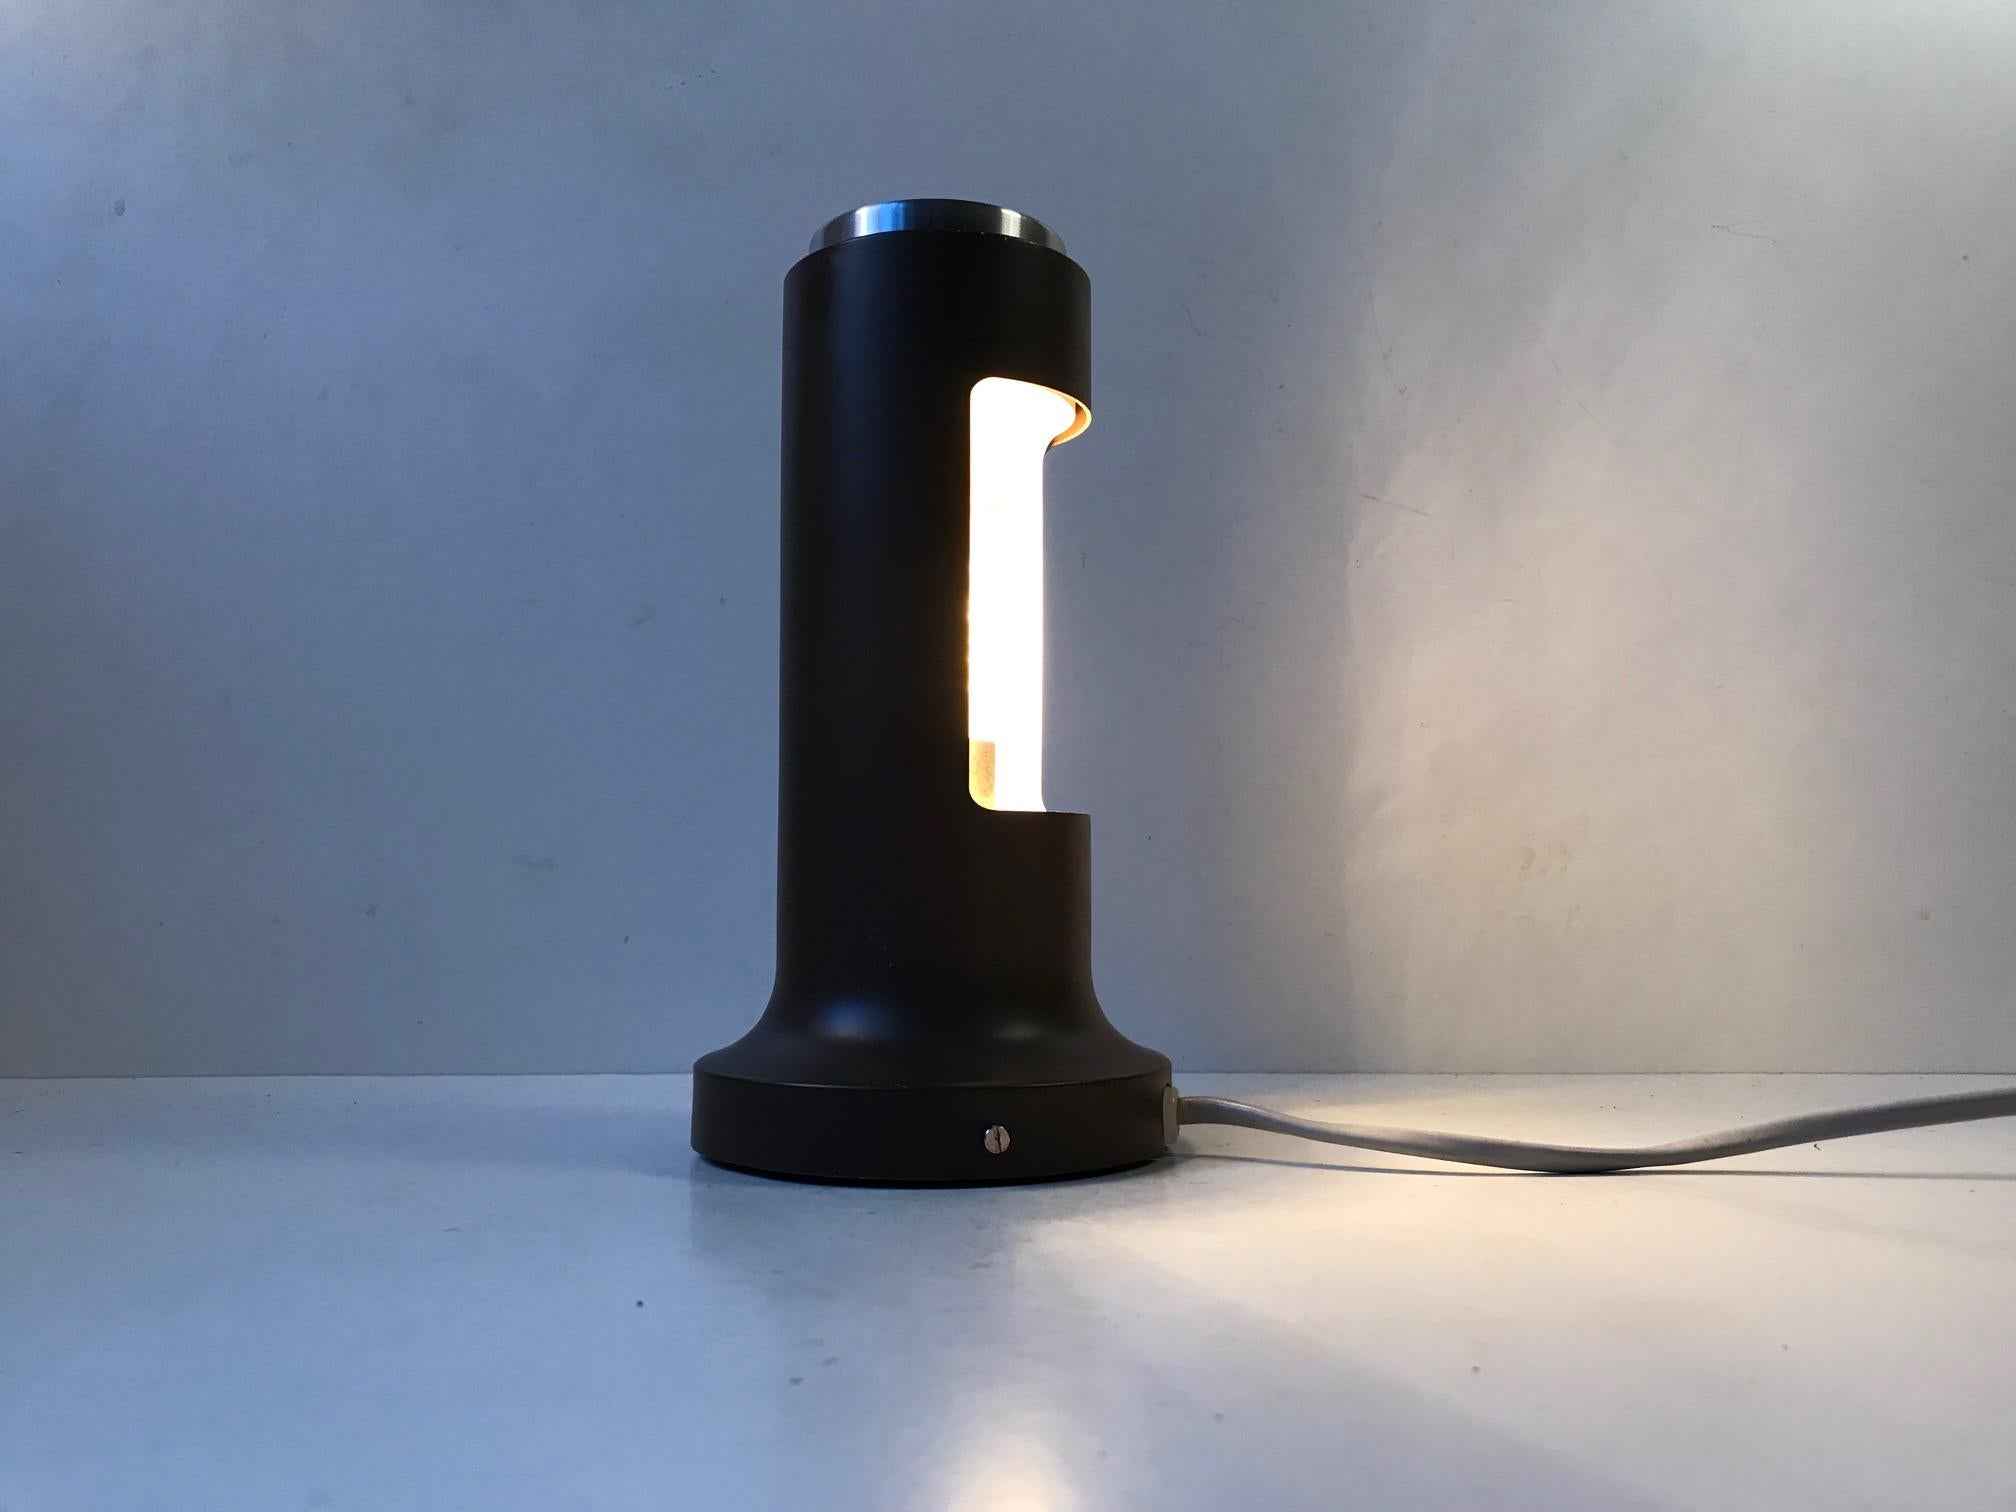 This hybrid wall or table lamp, model Contact, was designed by Peter Avondoglio during the 1970s and manufactured by Fog & Mørup, Denmark. The design has won international awards. It features a jumbo switch that also adjusts the light direction of